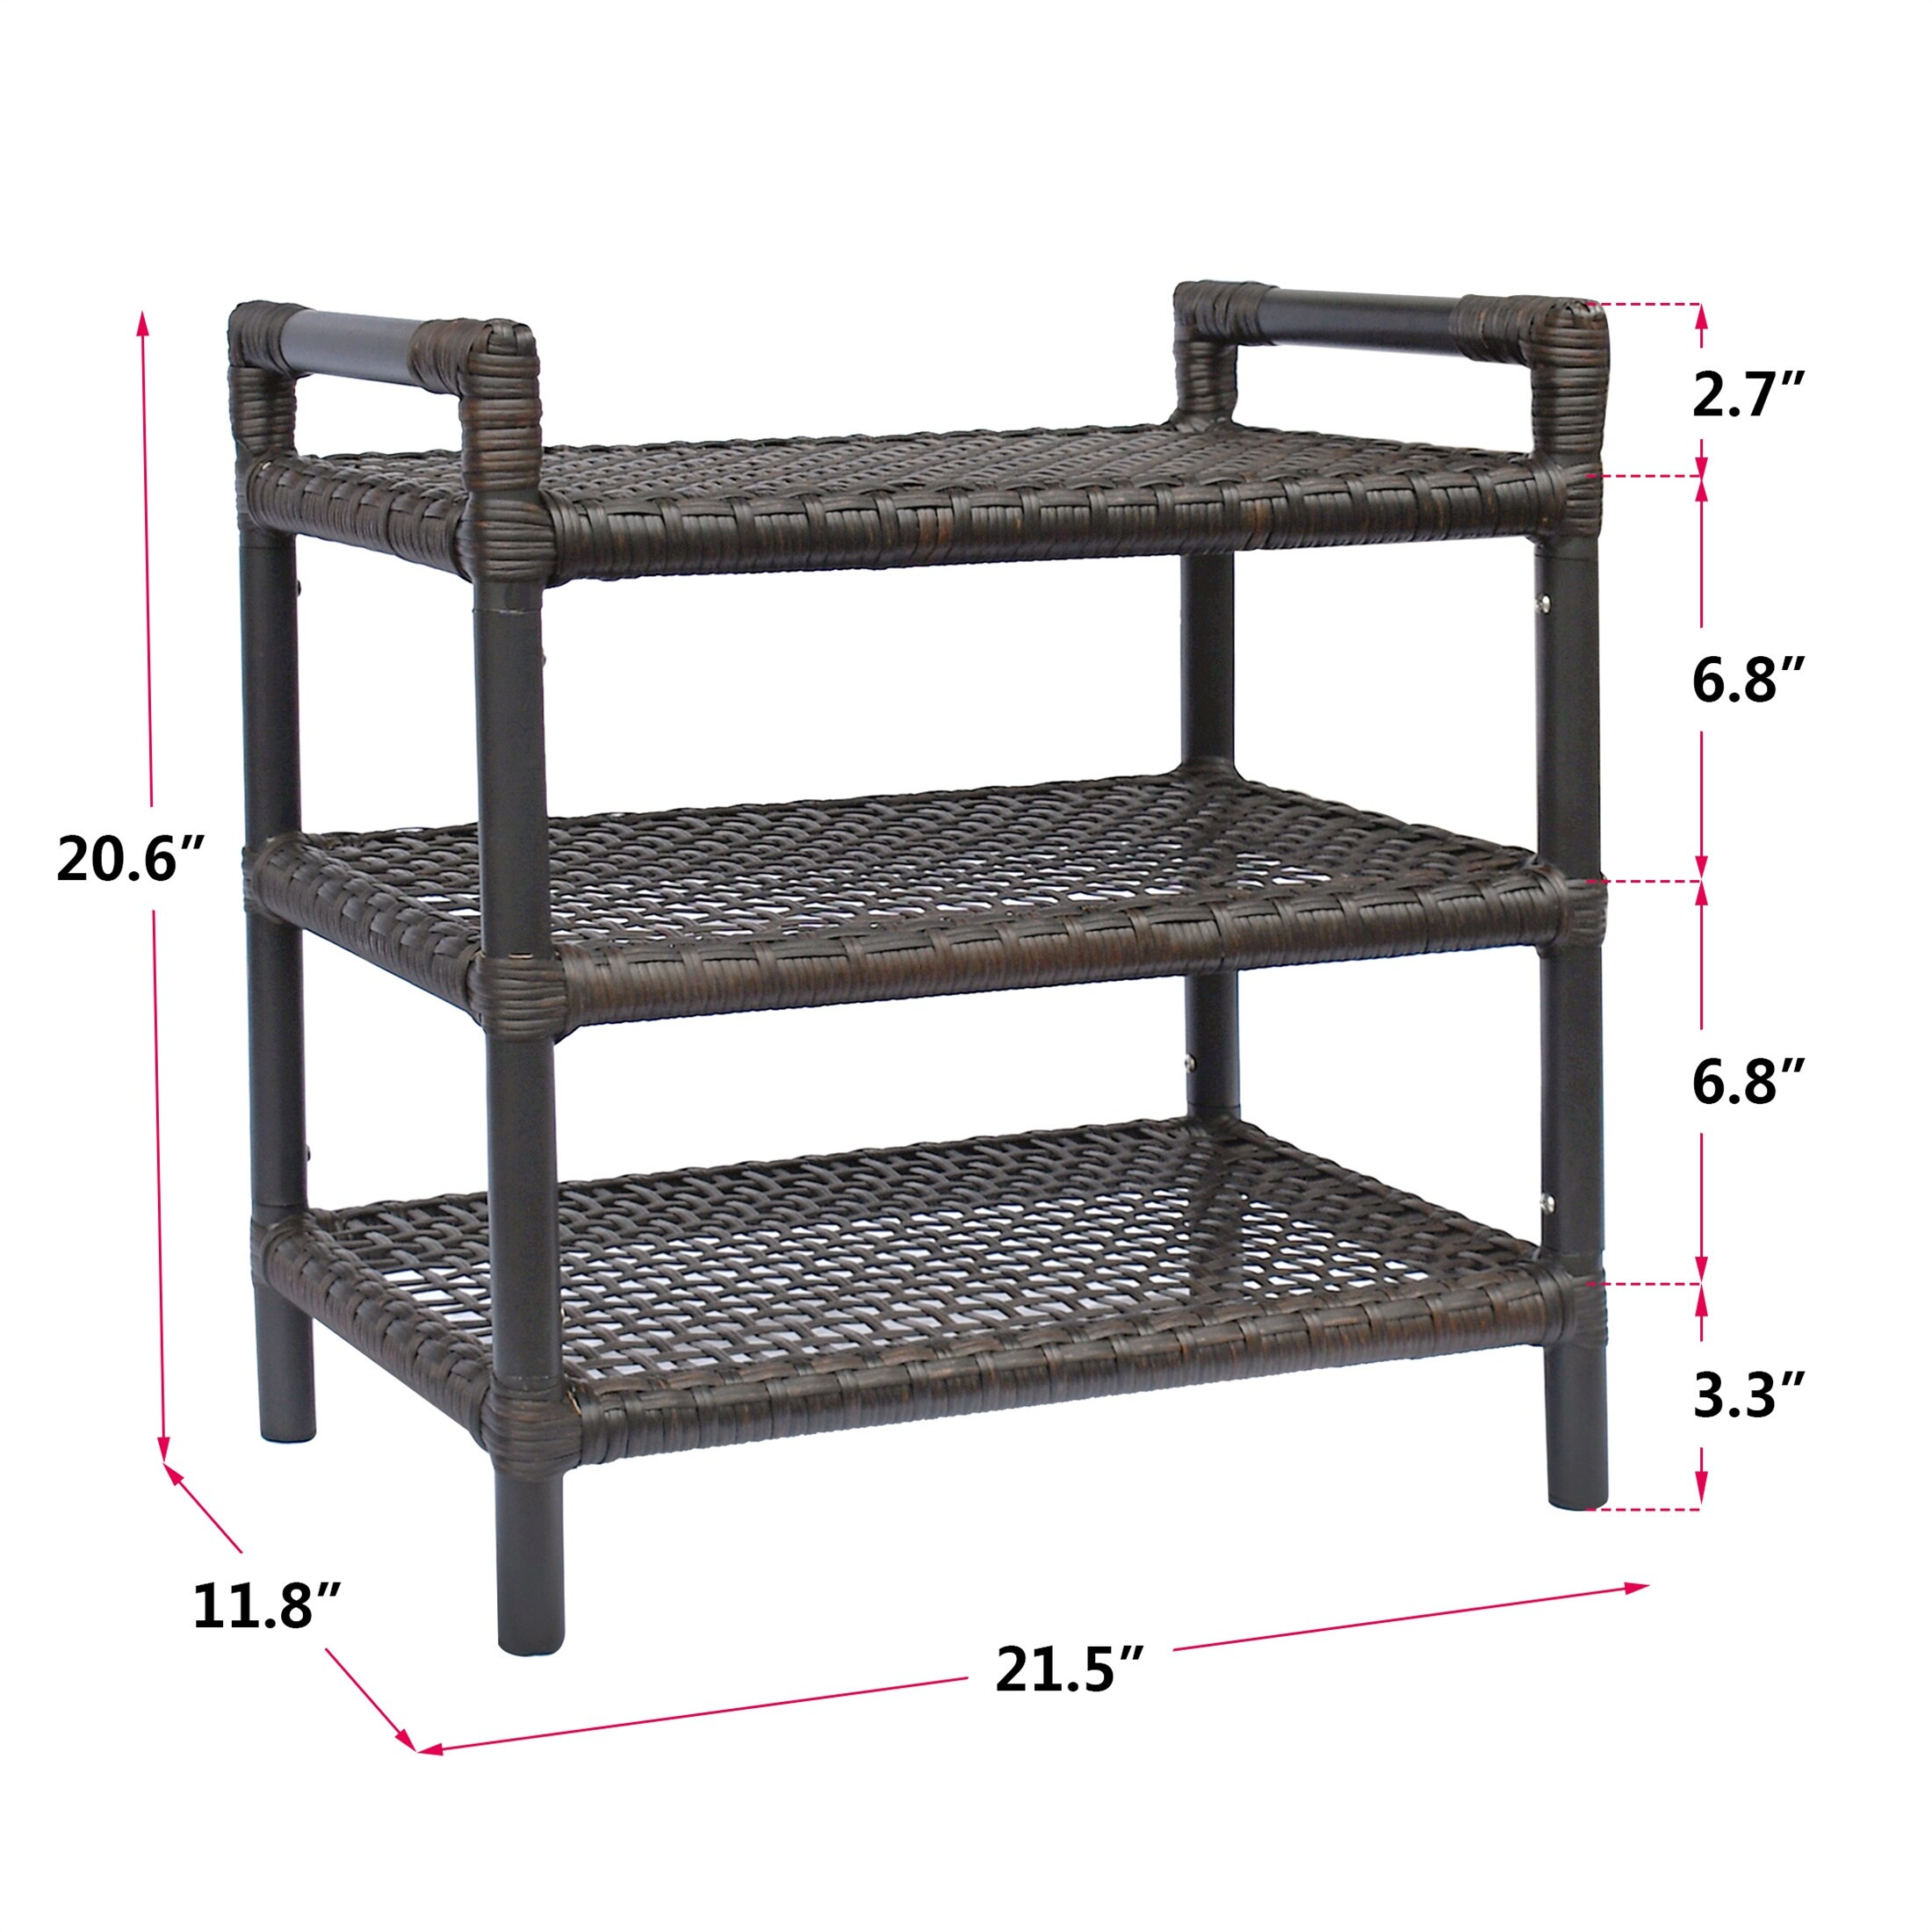 https://ak1.ostkcdn.com/images/products/is/images/direct/74f88c4c3562eac2e4ab8b72071699059a716e22/3-Tier-Wicker-Shelves-with-Metal-Frame-Multilayer-Shelf.jpg